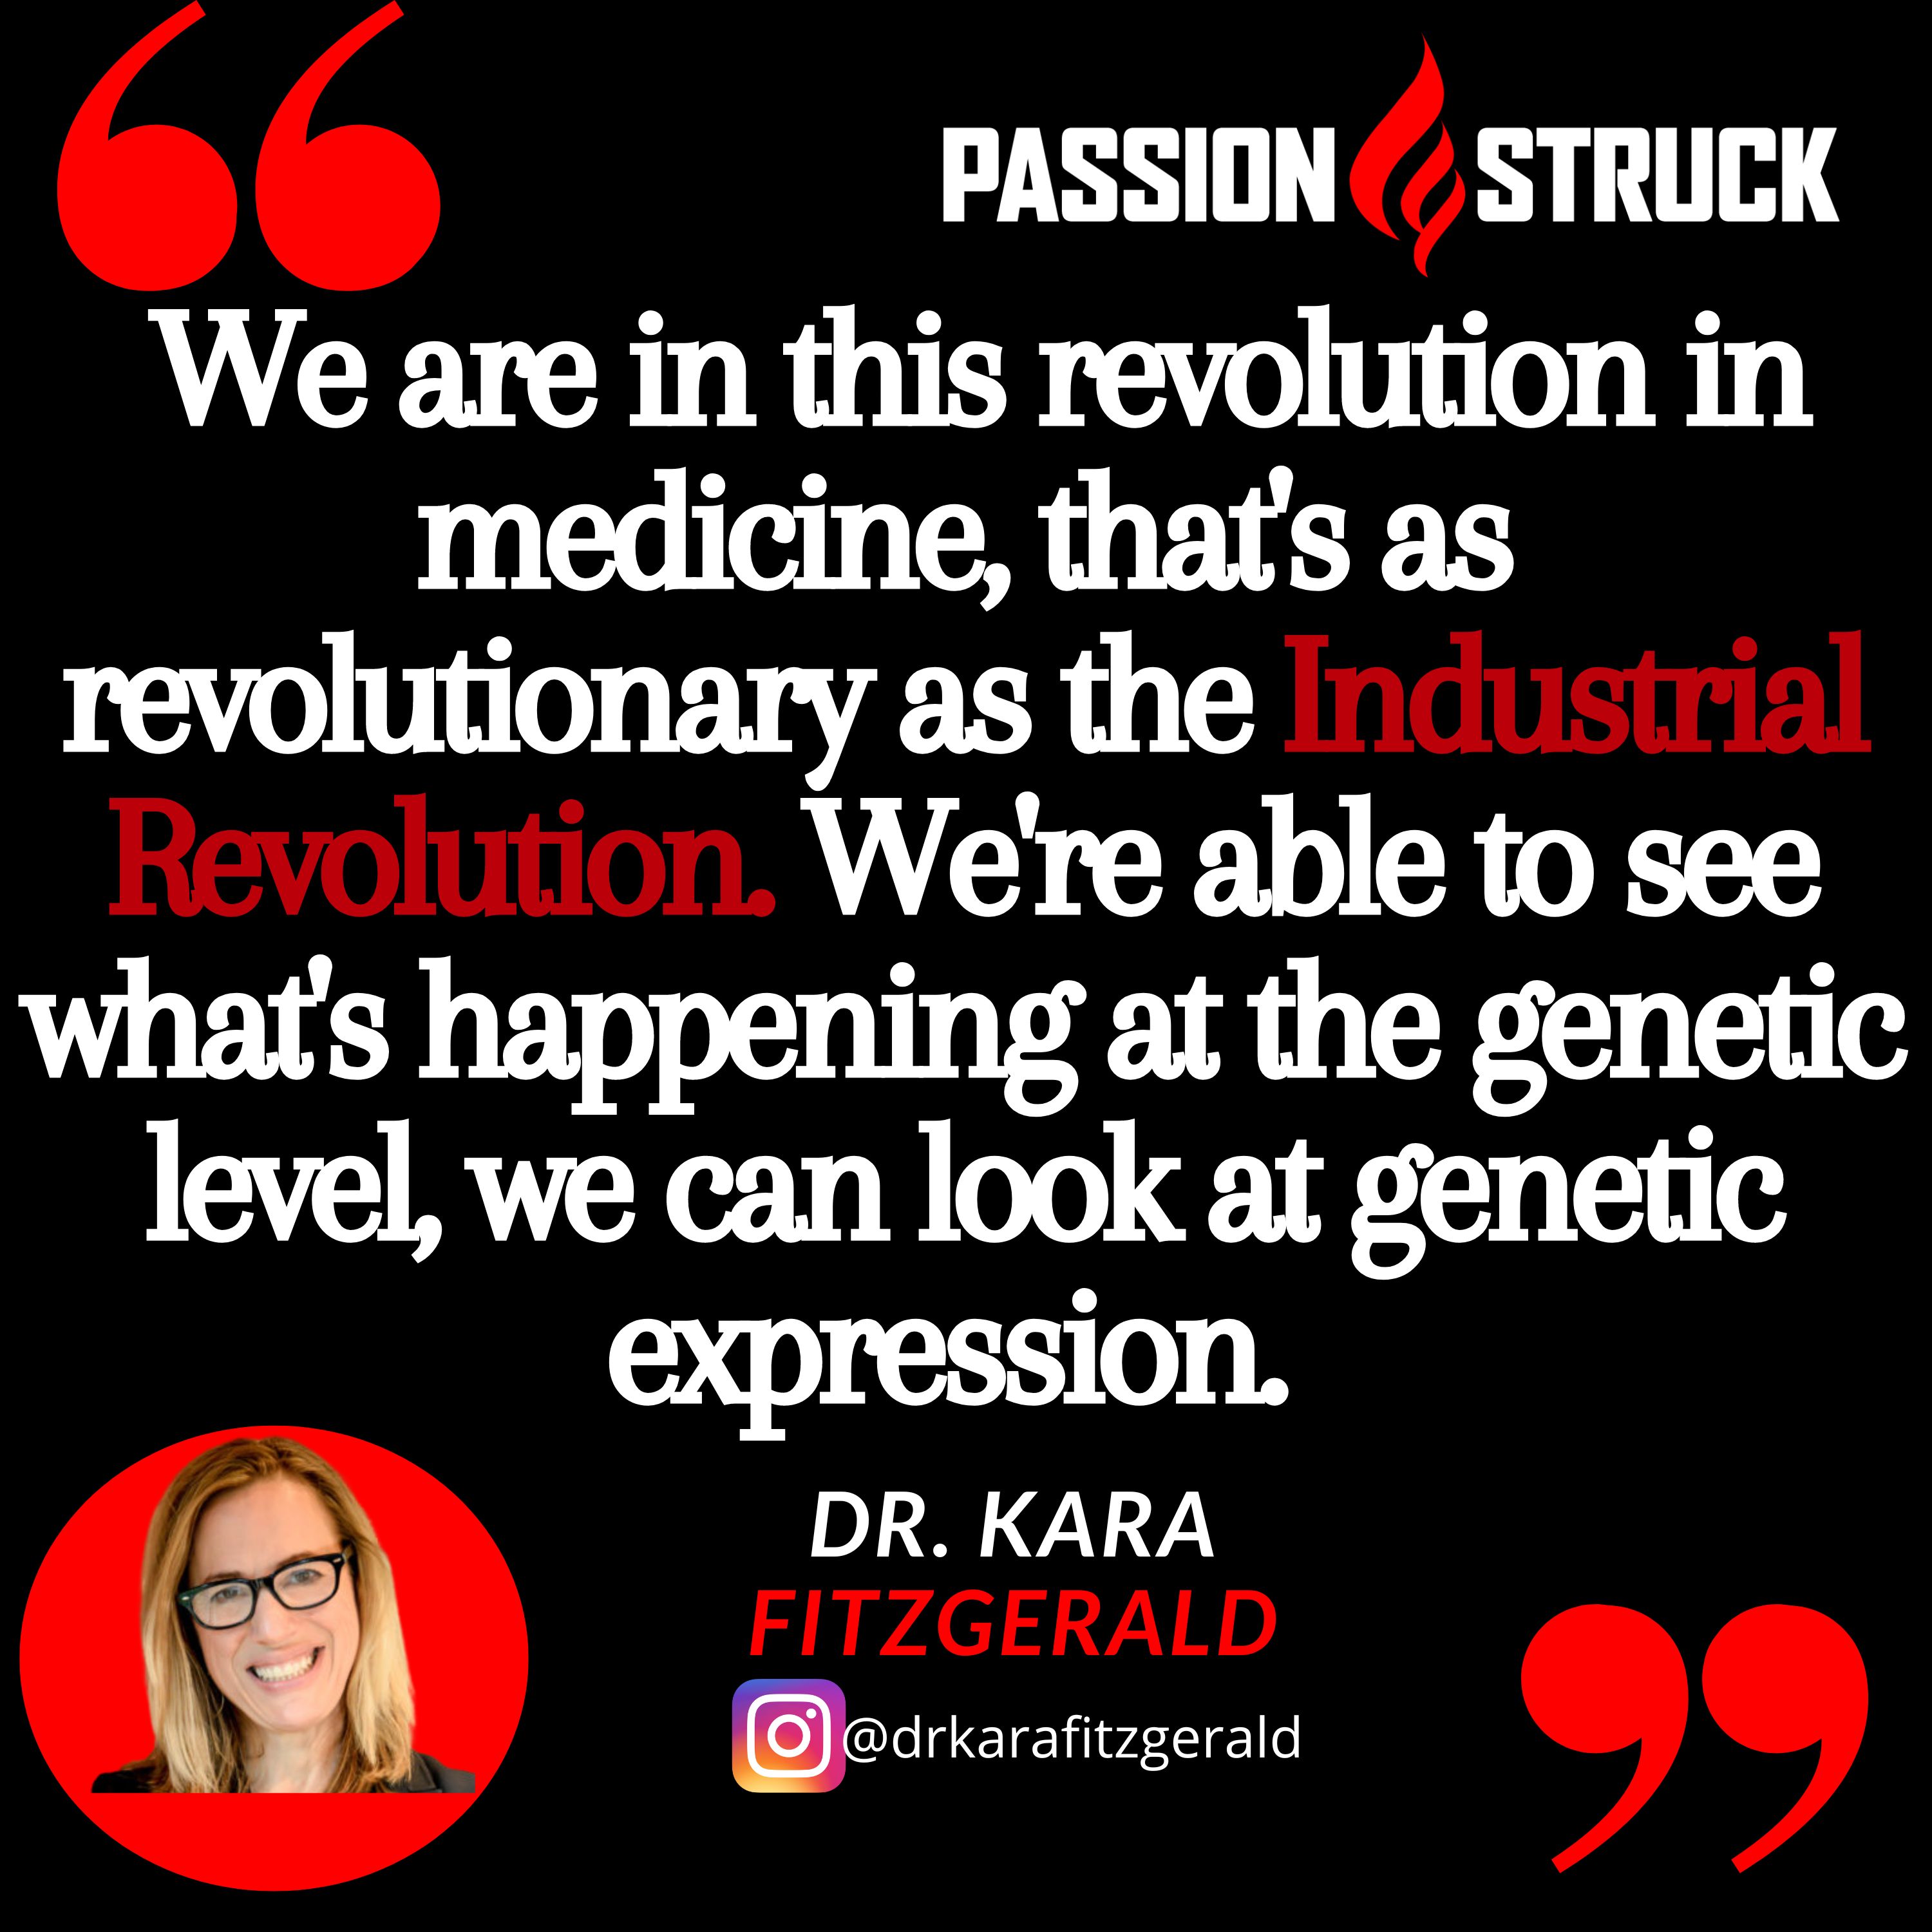 Quote from Dr. Kara Fitzgerald from the Passion Struck podcast: "We are in this revolution in medicine, that's as revolutionary as the Industrial Revolution. We're able to see what's happening at the genetic level, we can look at genetic expression."